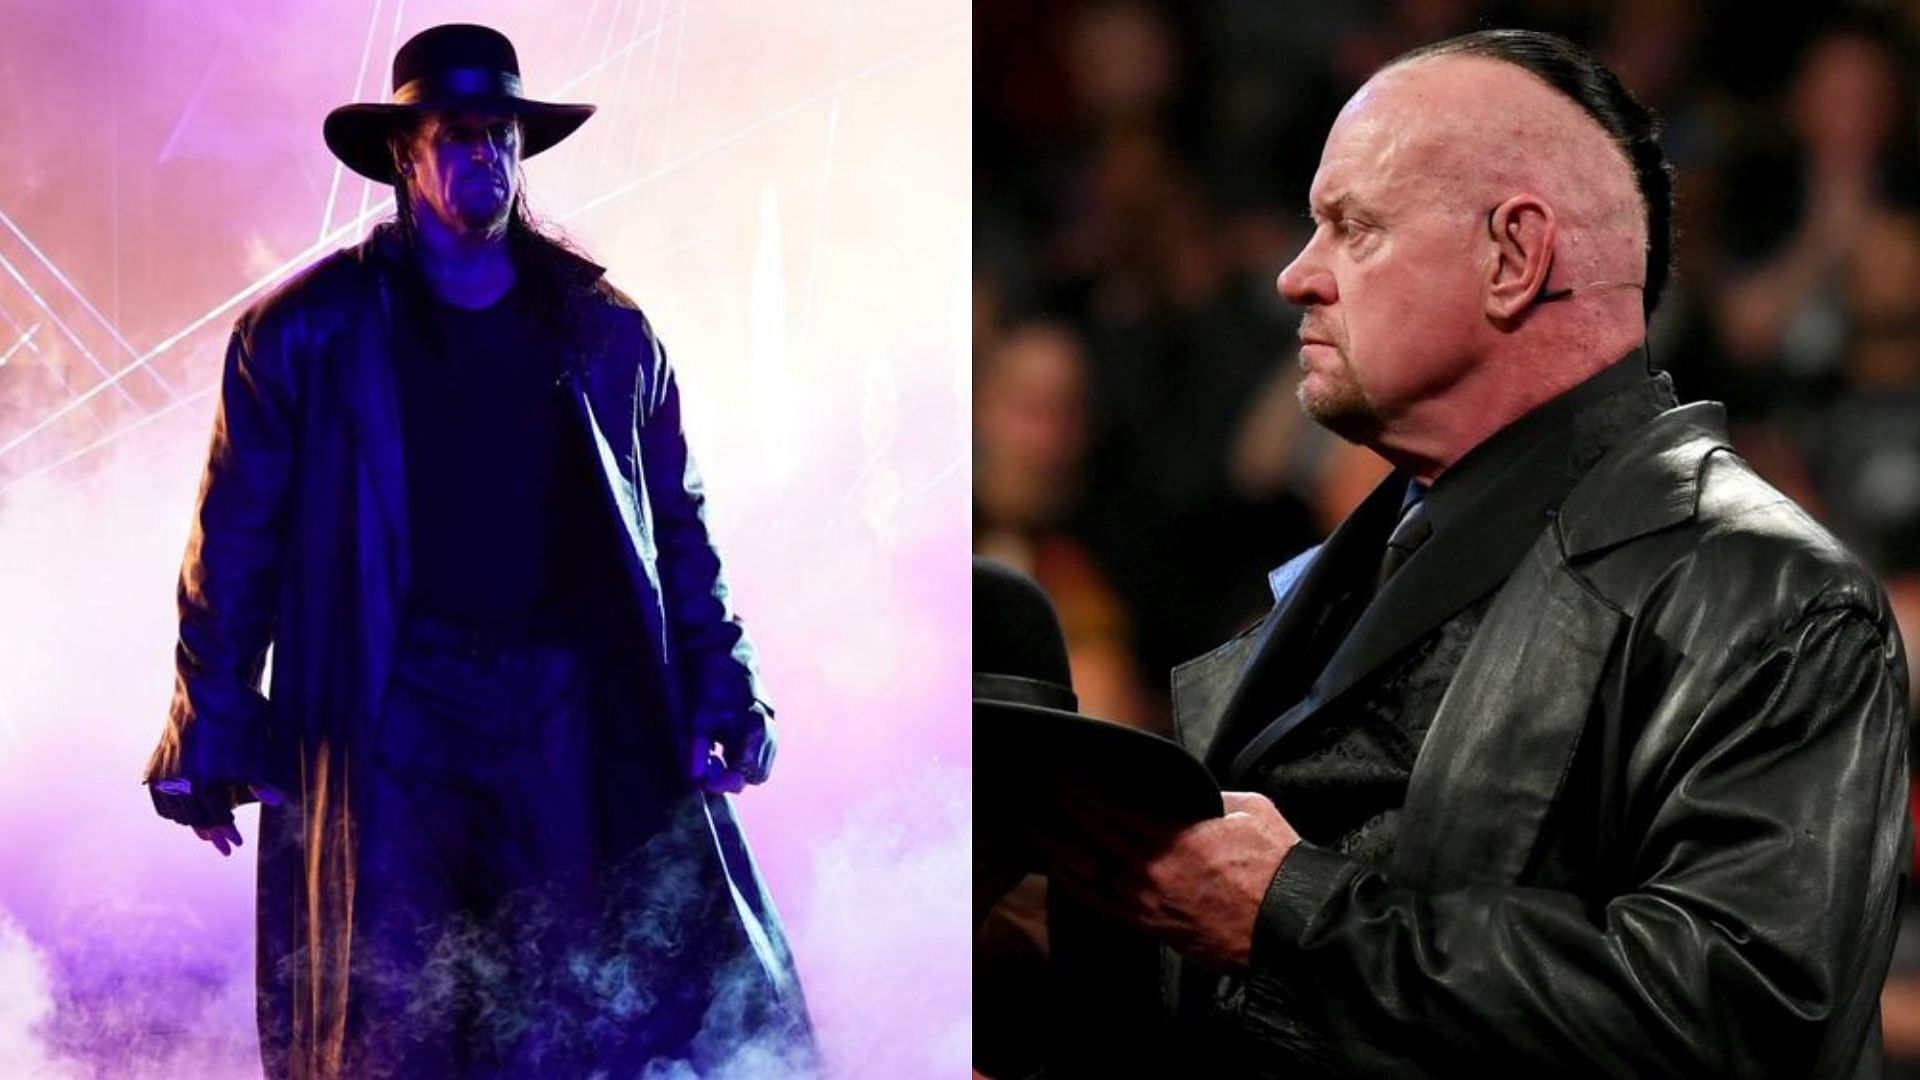 The Undertaker is one of the most iconic names in WWE